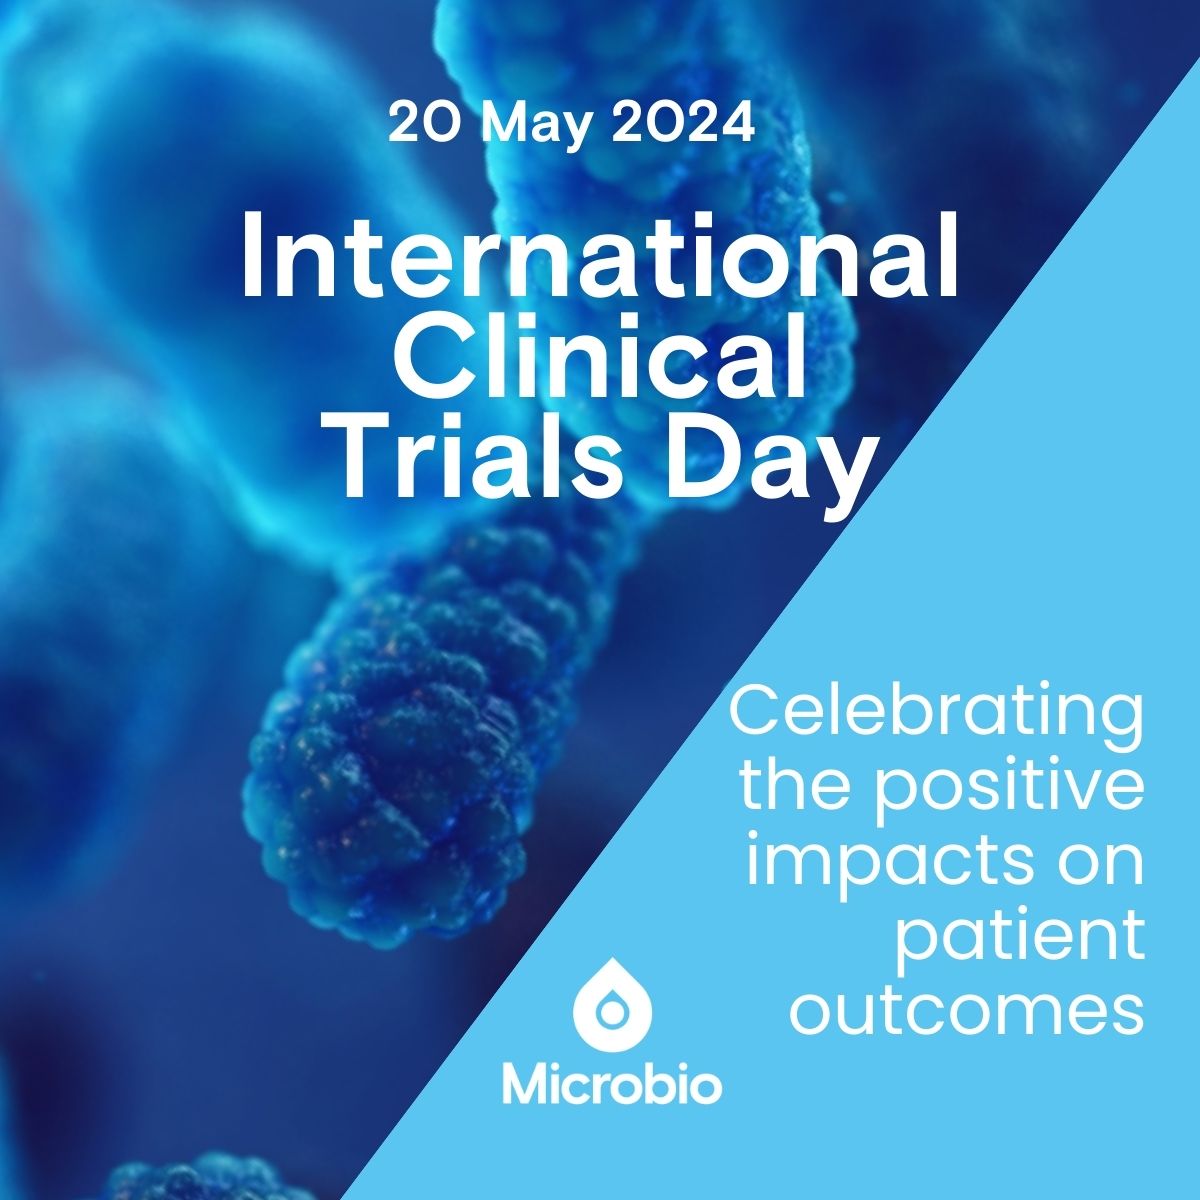 This #InternationalClinicalTrials day, Microbio celebrates the positive impact clinical trials have on patient outcomes. We also celebrate the amazing people that design, manage and execute clinical trials.